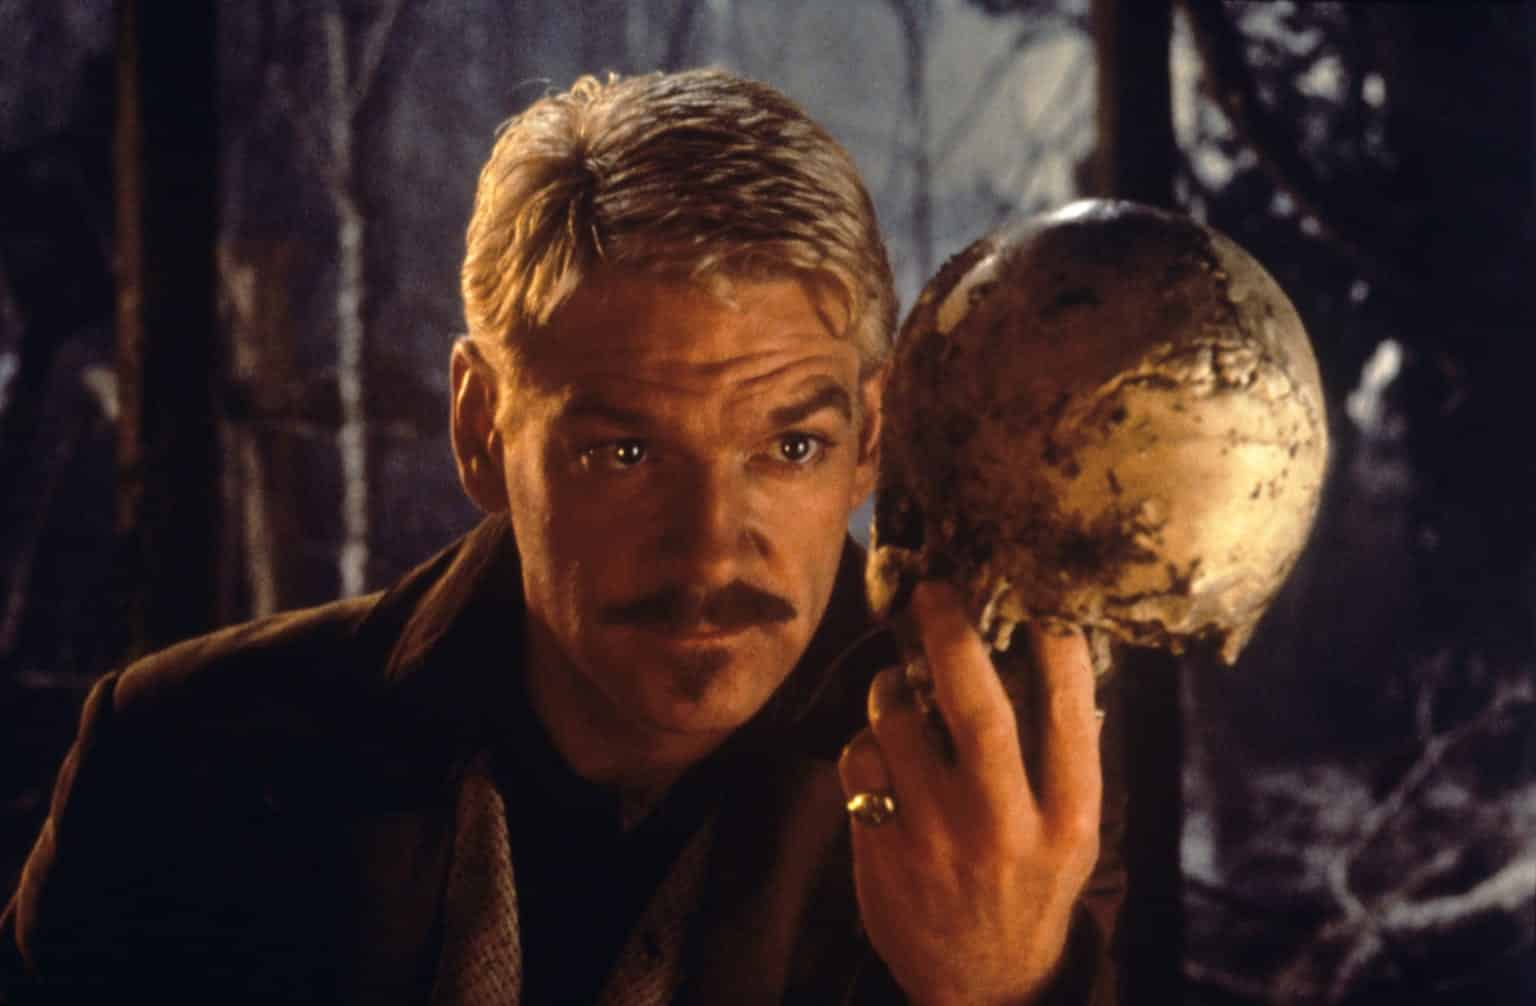 Hamlet holds up Yorick's skull in front of him, about to recite the 'Alas poor Yorick' line